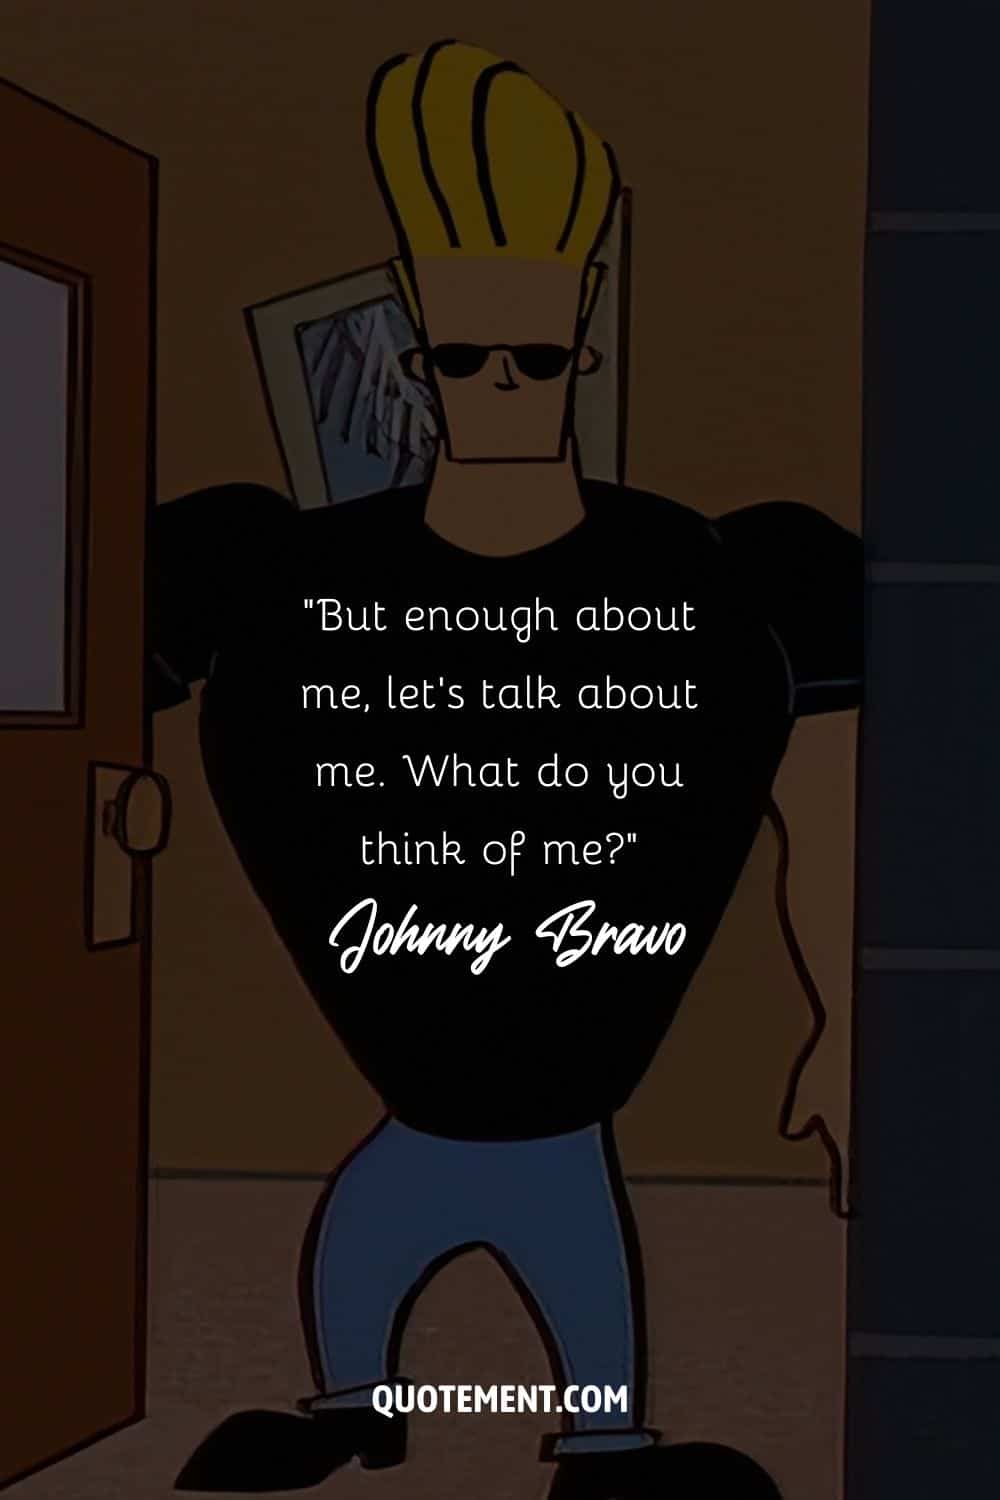 Johnny Bravo opening the door representing a great Johnny Bravo quote
